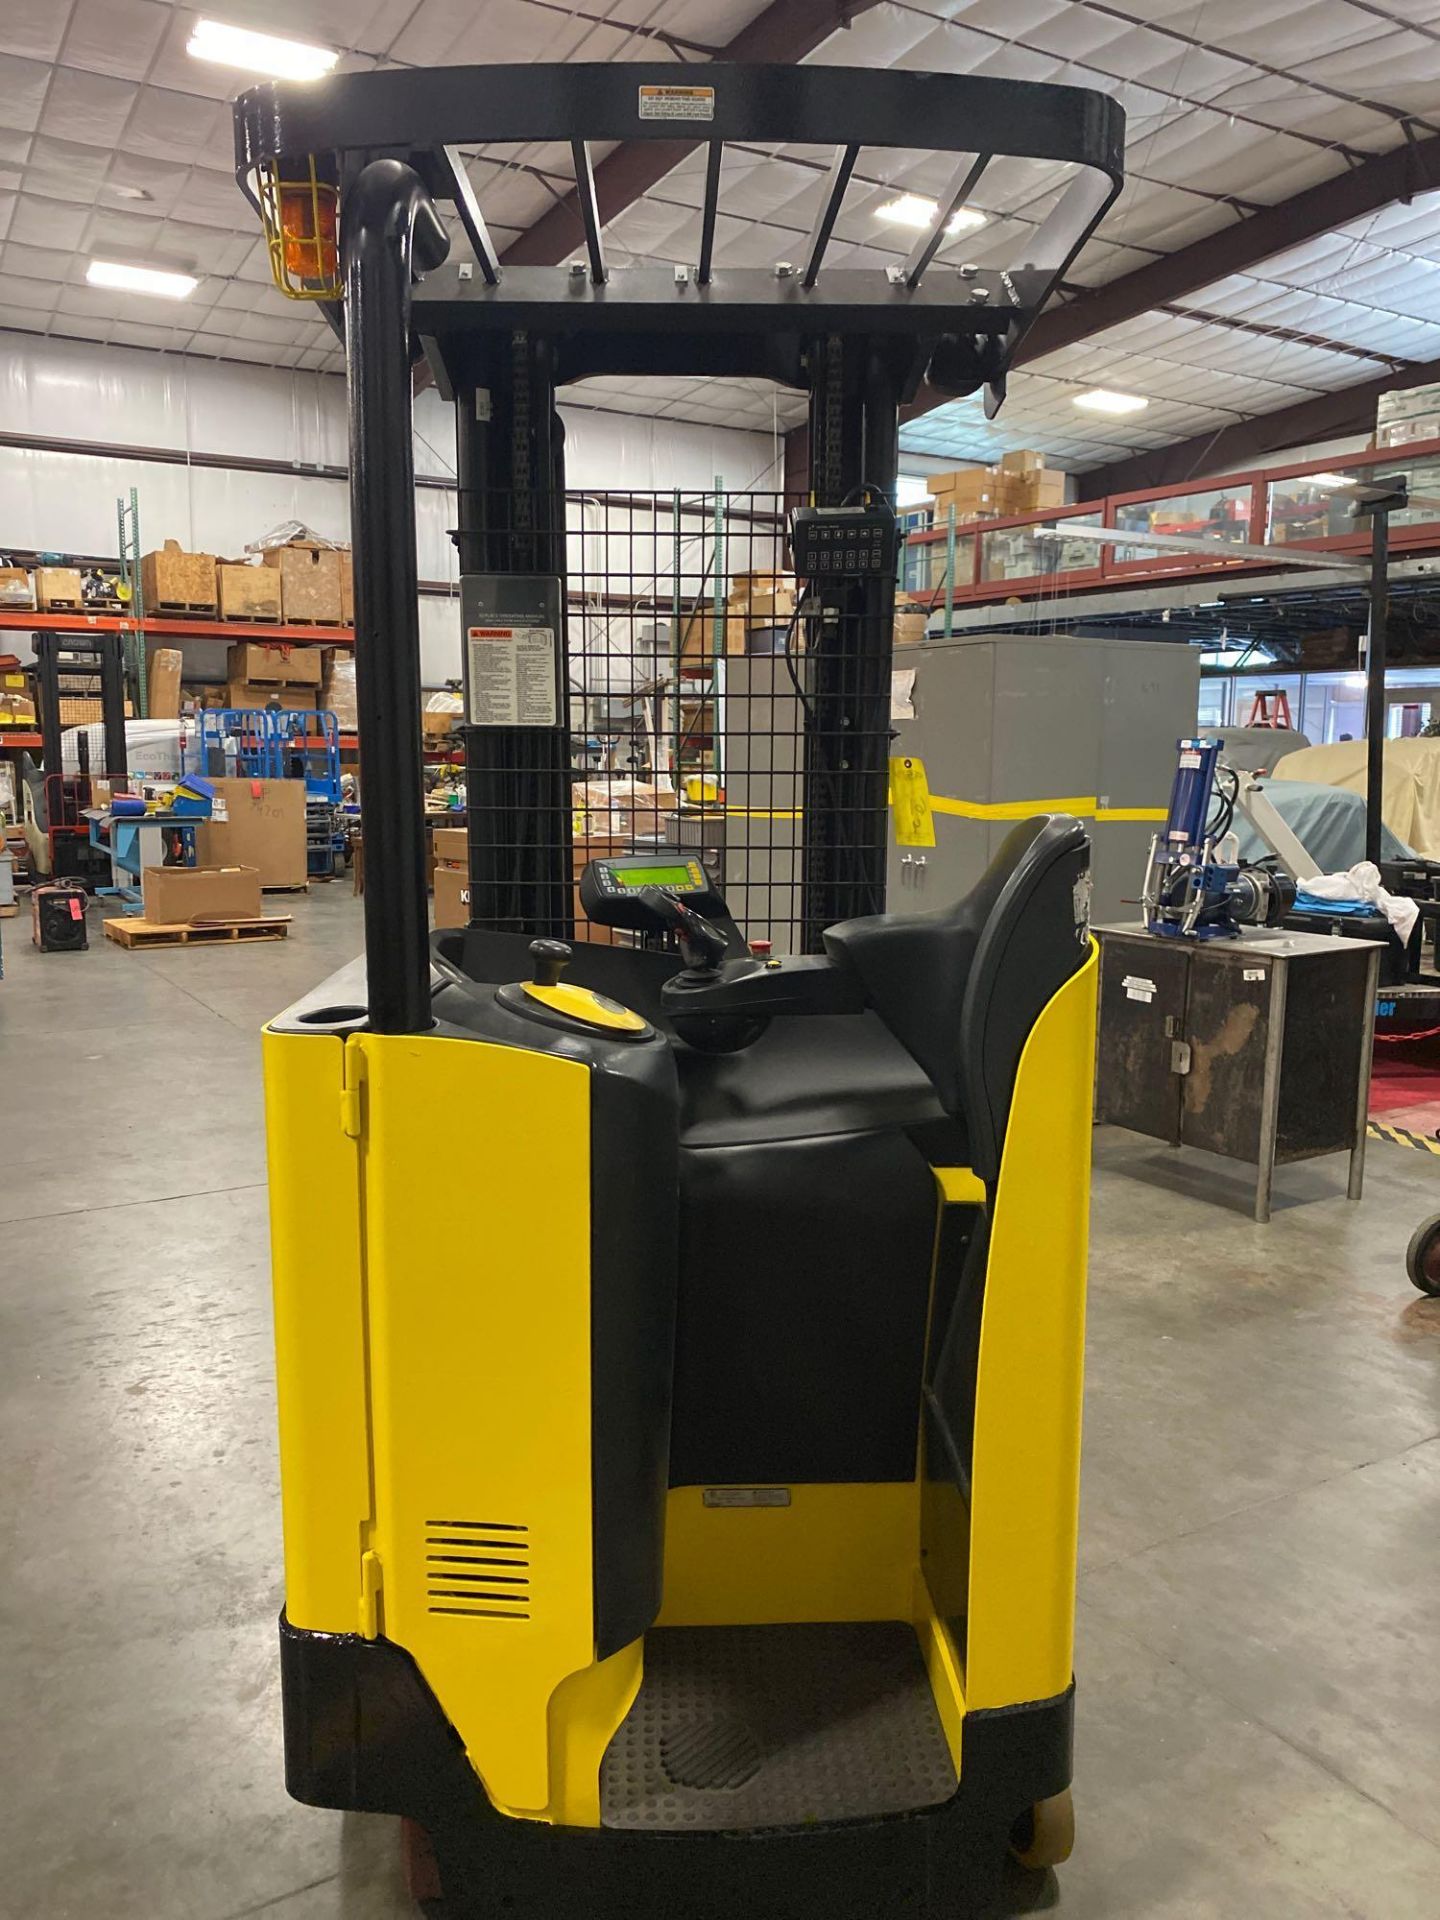 2011 HYSTER N35ZR-14.5 ELECTRIC REACH TRUCK, 3,500 LB CAPACITY, 36V, 212" HEIGHT CAP, ADJUSTABLE BAC - Image 6 of 9